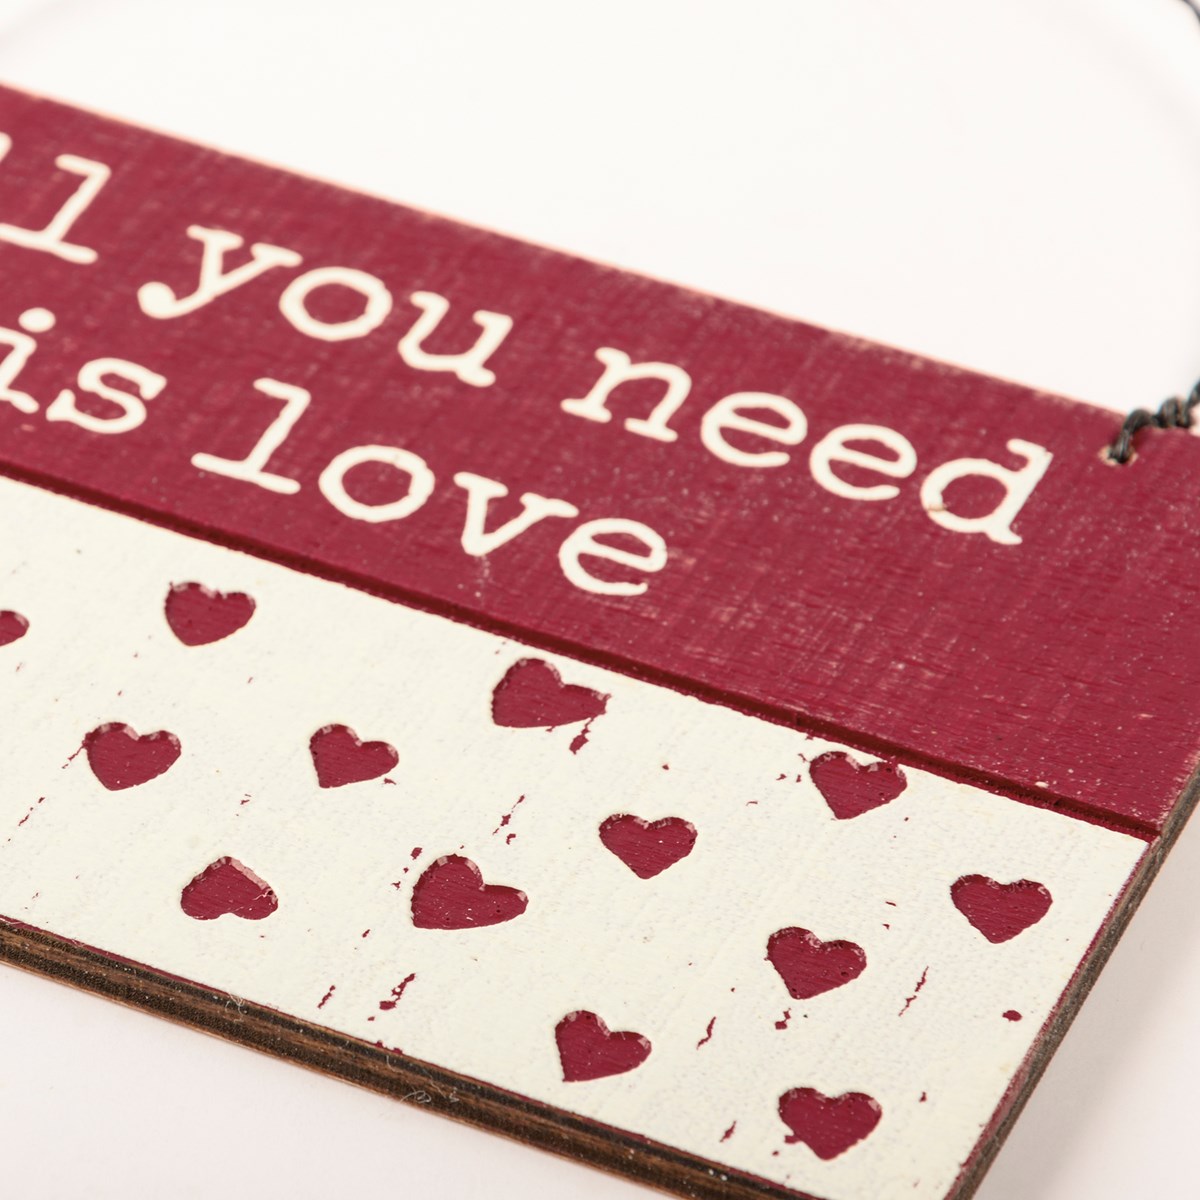 Slat Ornament - All You Need Is Love - 5" x 3" x 0.25" - Wood, Wire